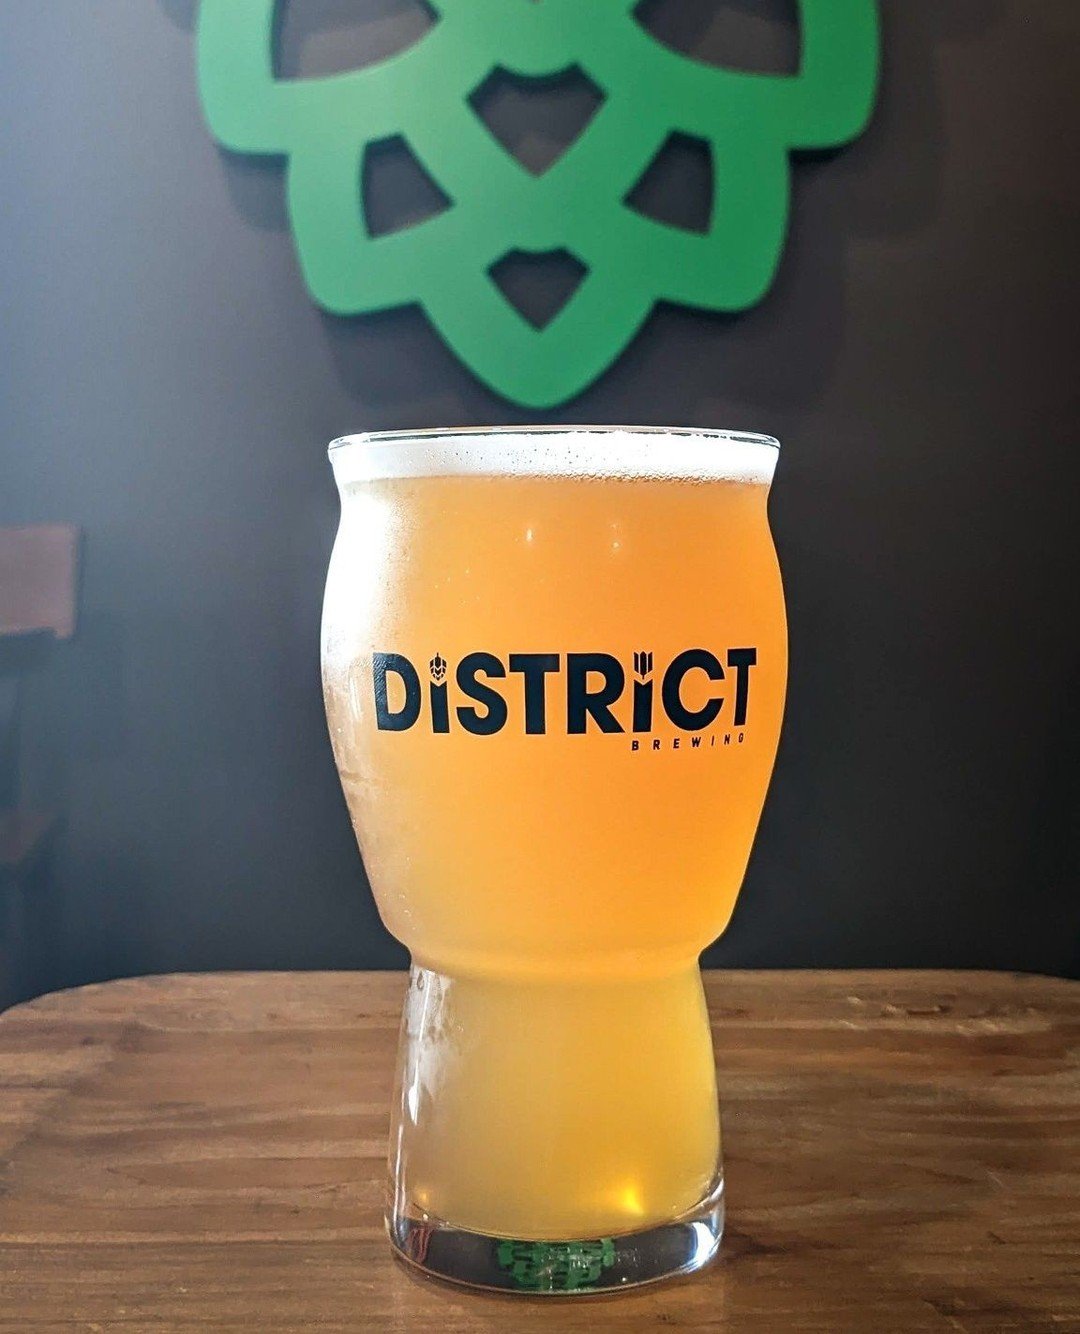 It's Thirsty Thursday! and that means😎 $10 off on specific District Brew pitcher. You're welcome. ⁠
⁠
#DistrictBrewing #DrinkDistrictBeers #DrinkLocal #beerme #beerlover #beer⁠
#FerndaleBrewery #FerndaleBeers #WhatcomBreweries #ExploreFerndale #Fern